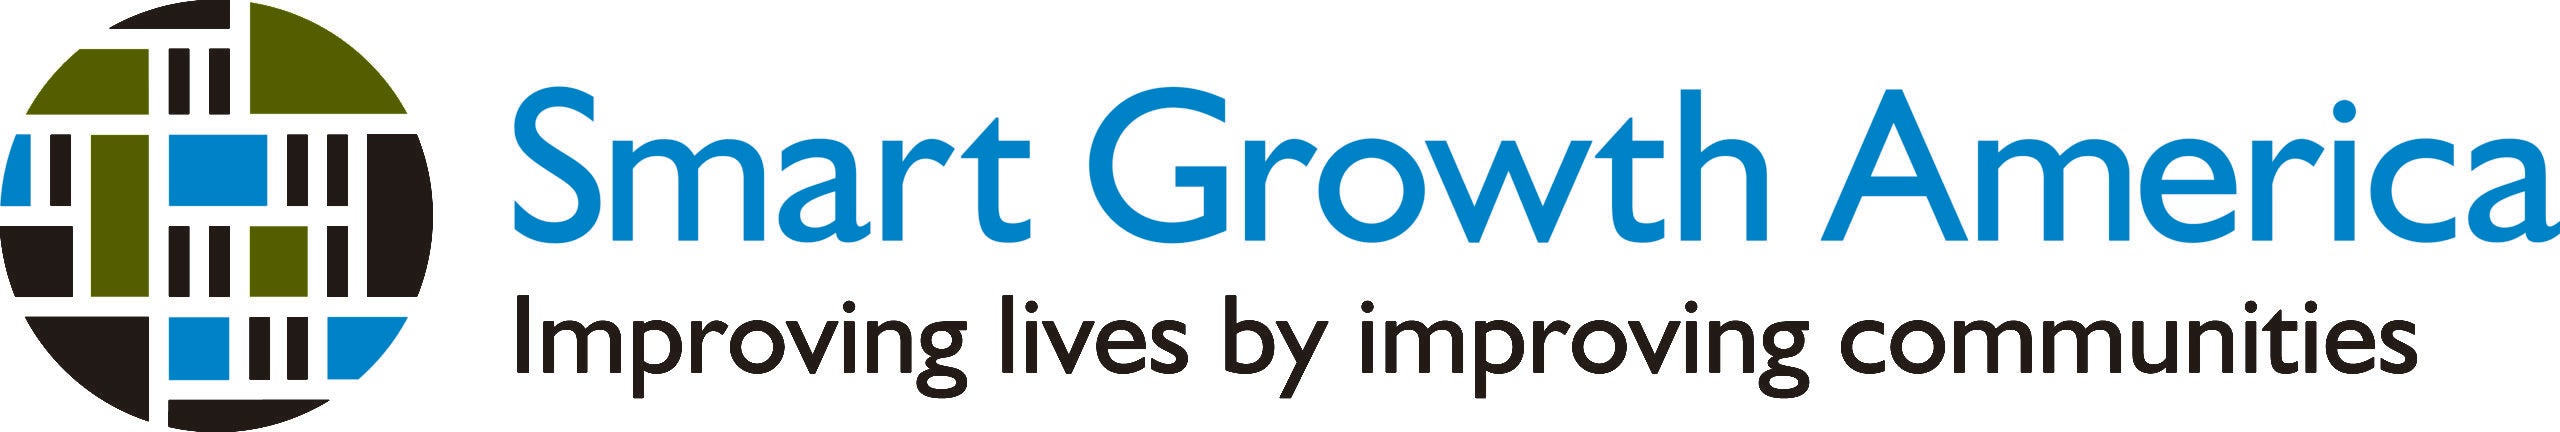 Be greater together. Smart growth. Smart growth h. Logo.